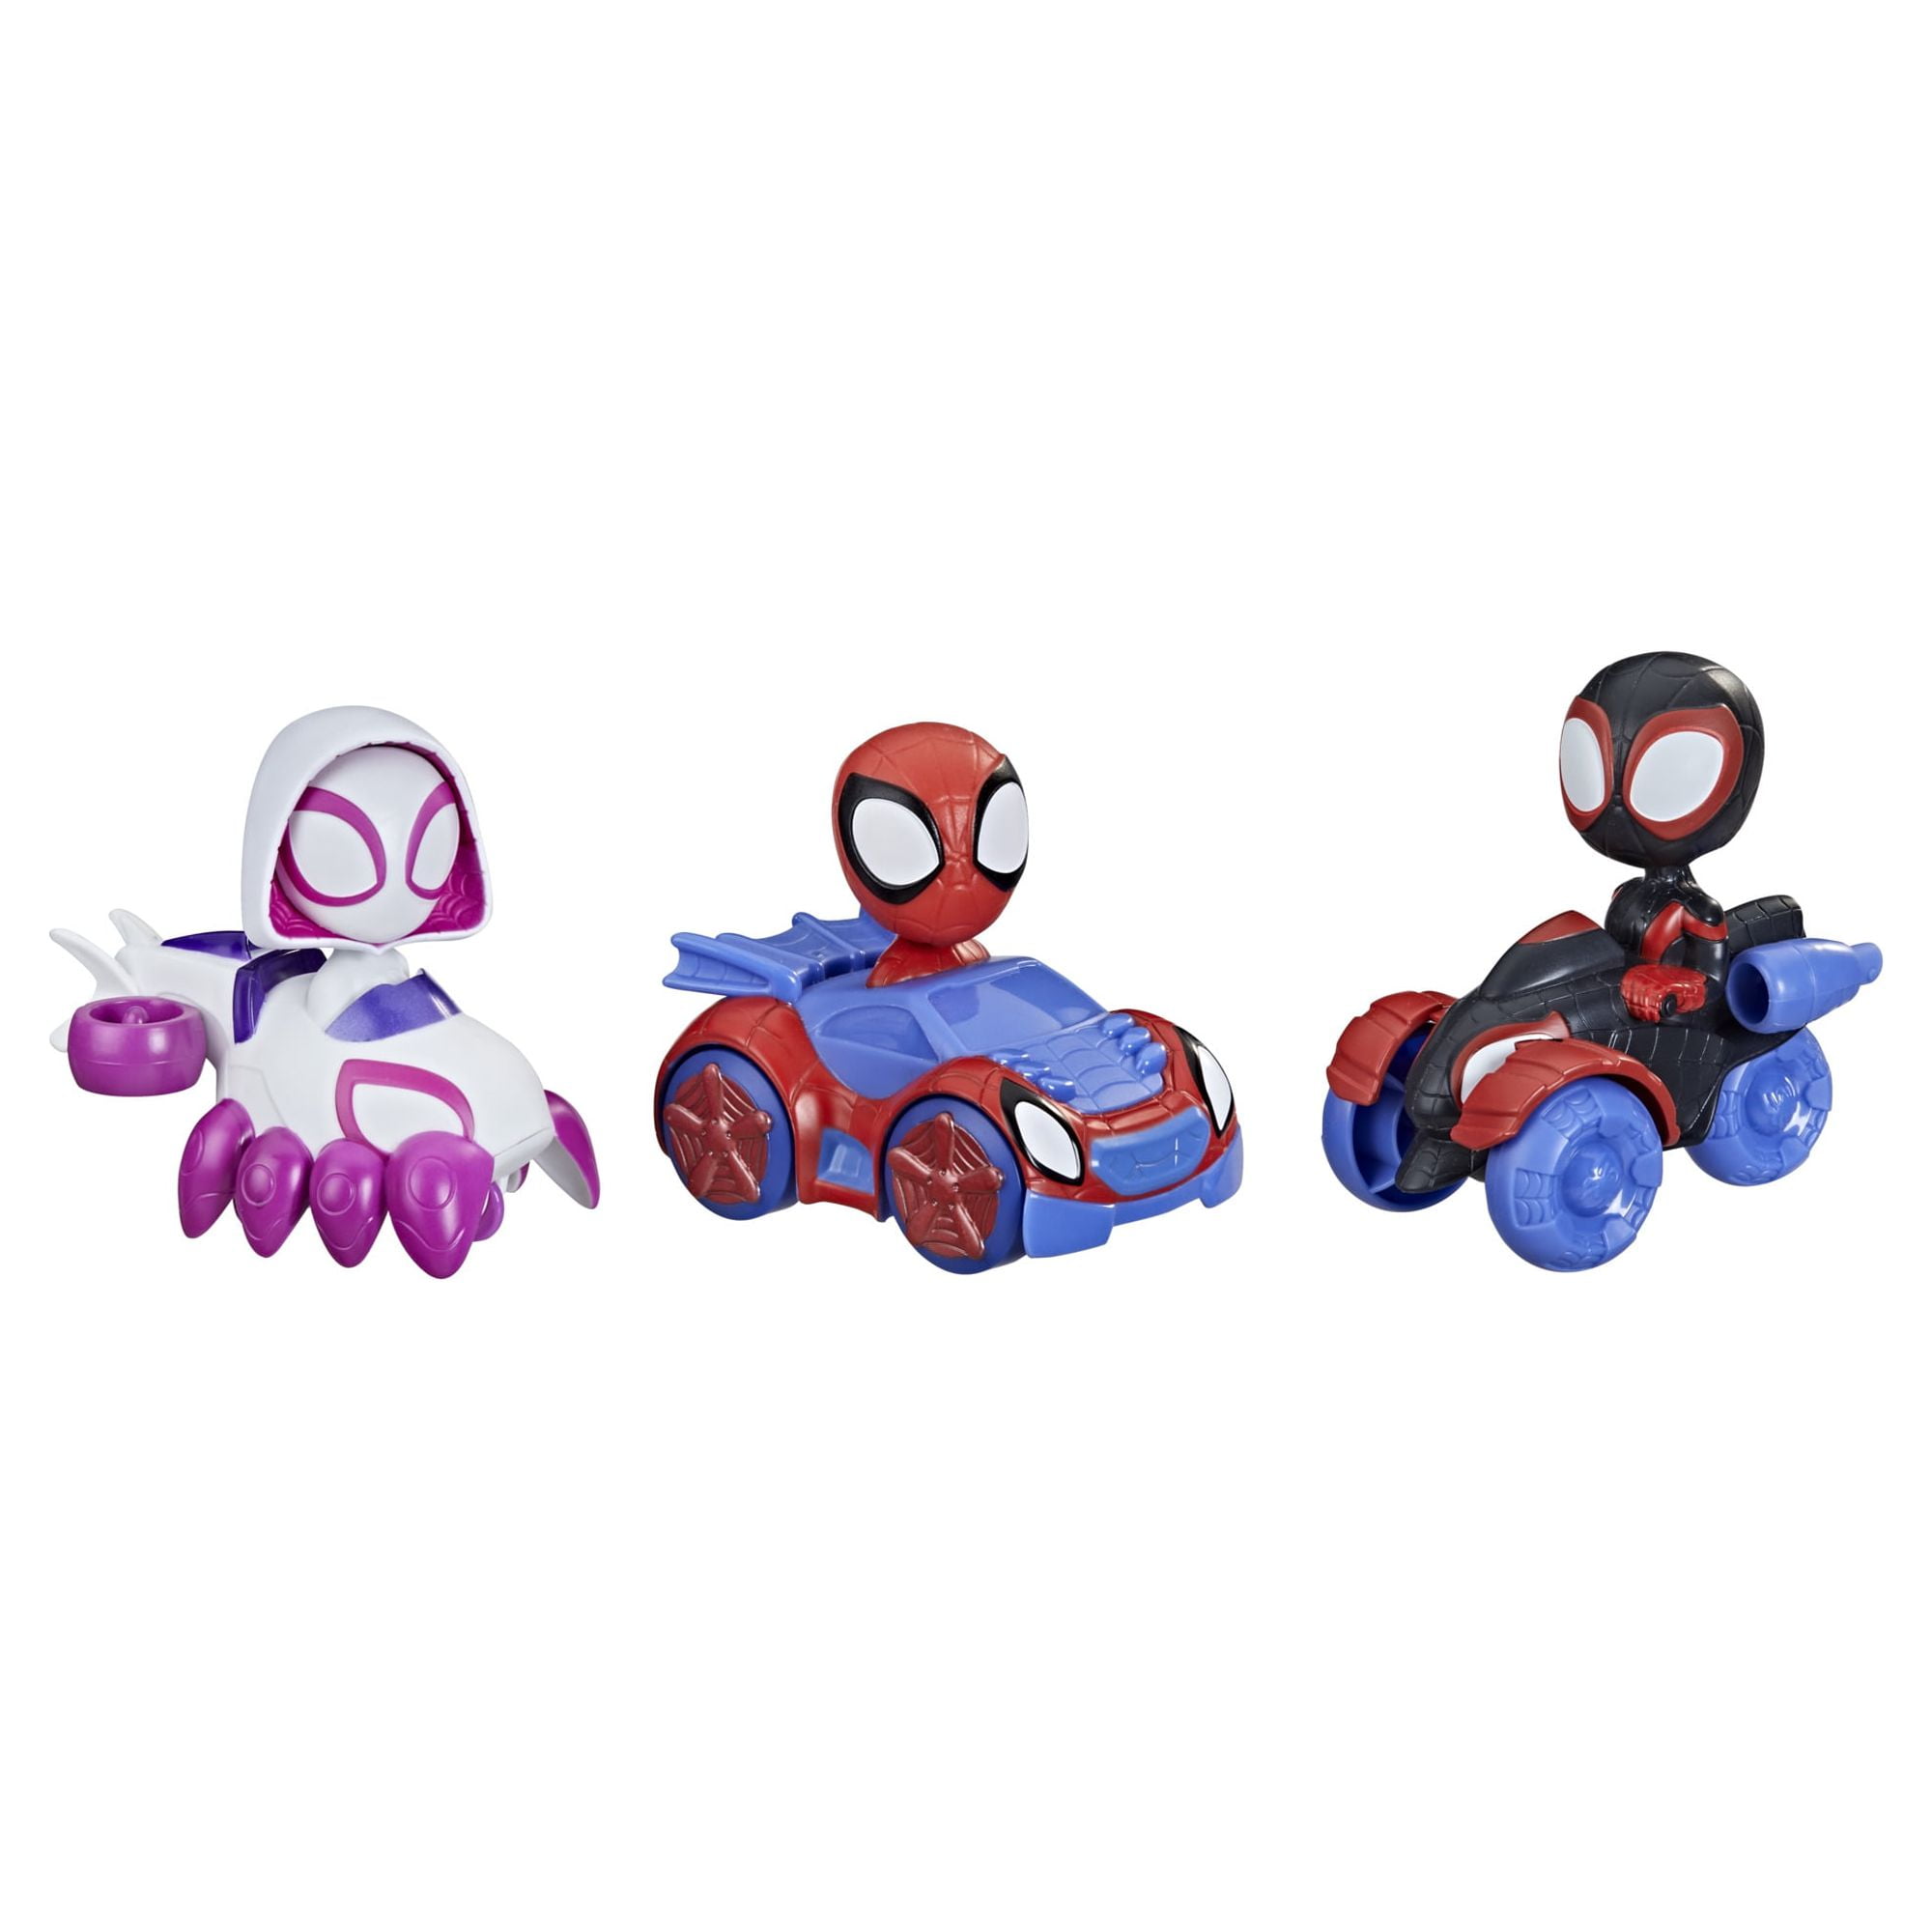 Marvel Spidey and His Amazing Friends Hero Reveal Figure 2-Pack, Mask Flip  Feature, Spidey and Trace-E, Ages 3 And Up - Marvel